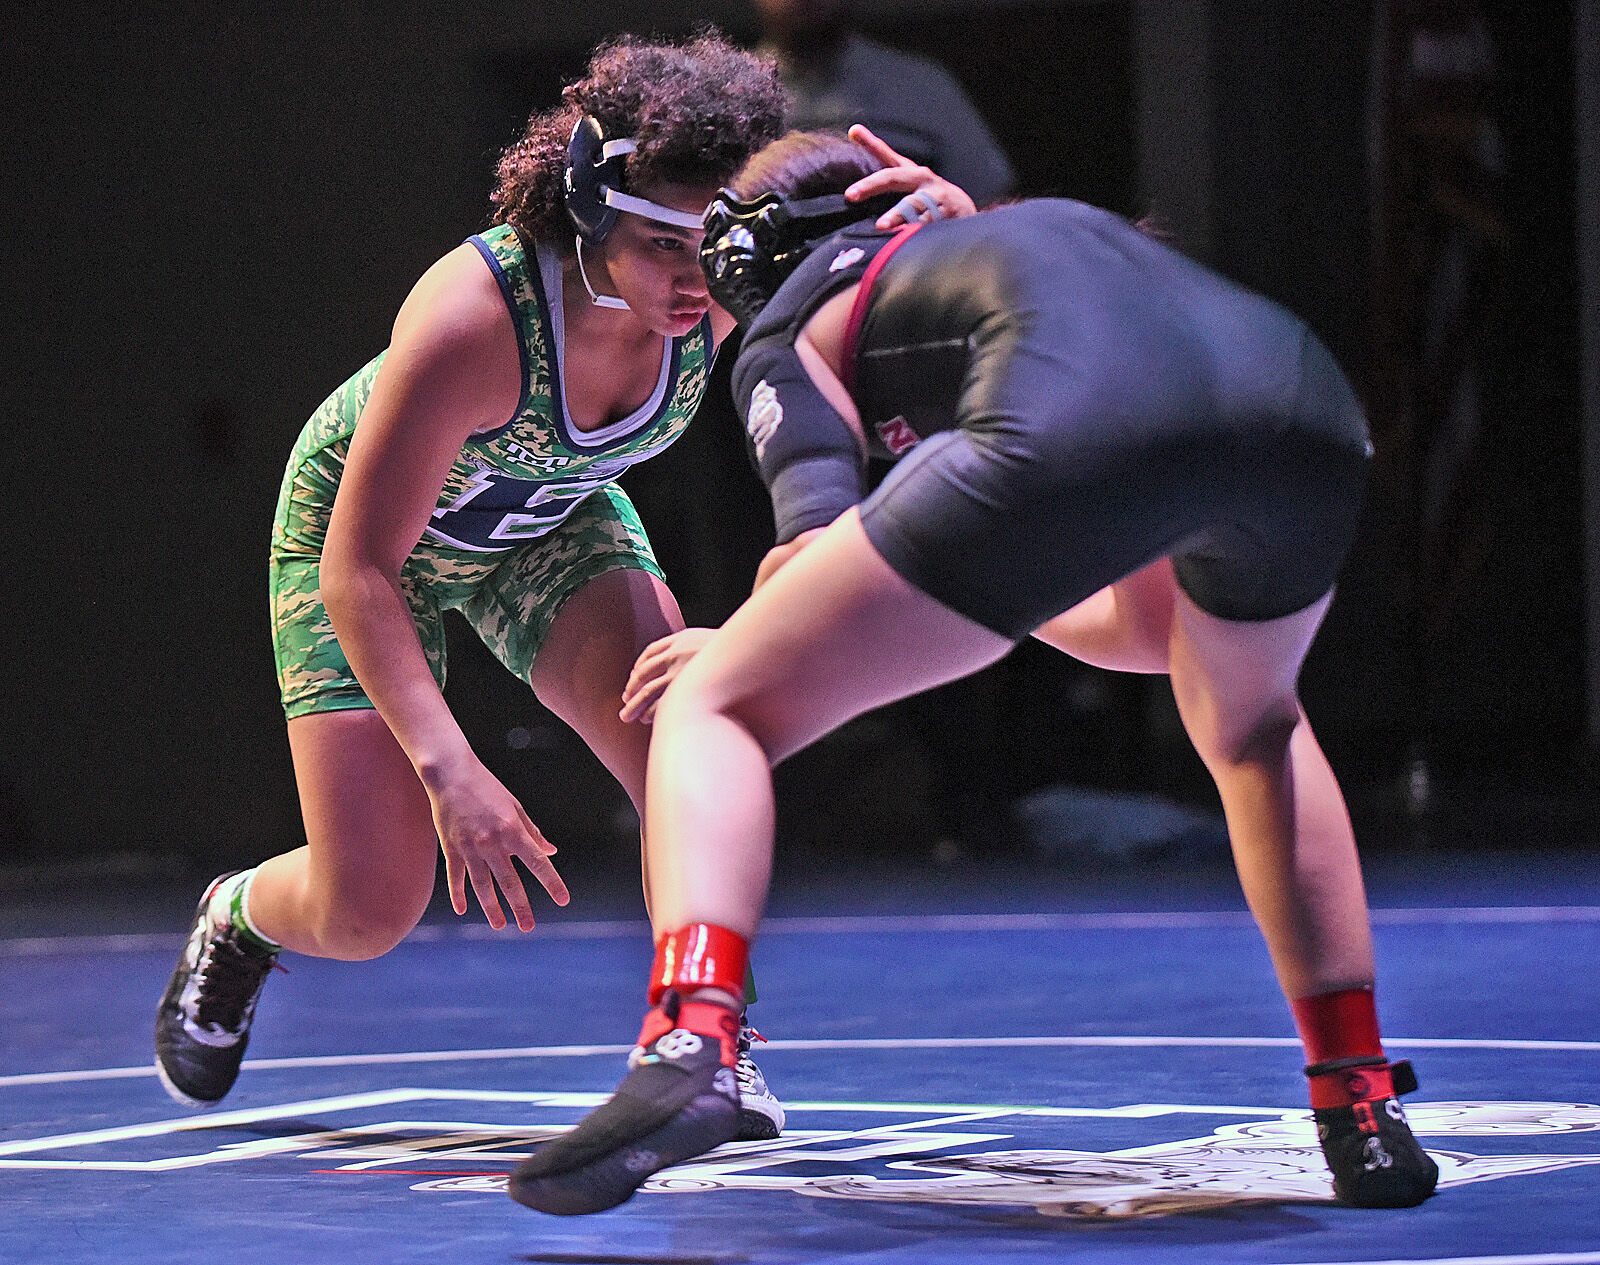 Enterprise wrestler Evelyn Holmes-Smith earns All-American honors pic